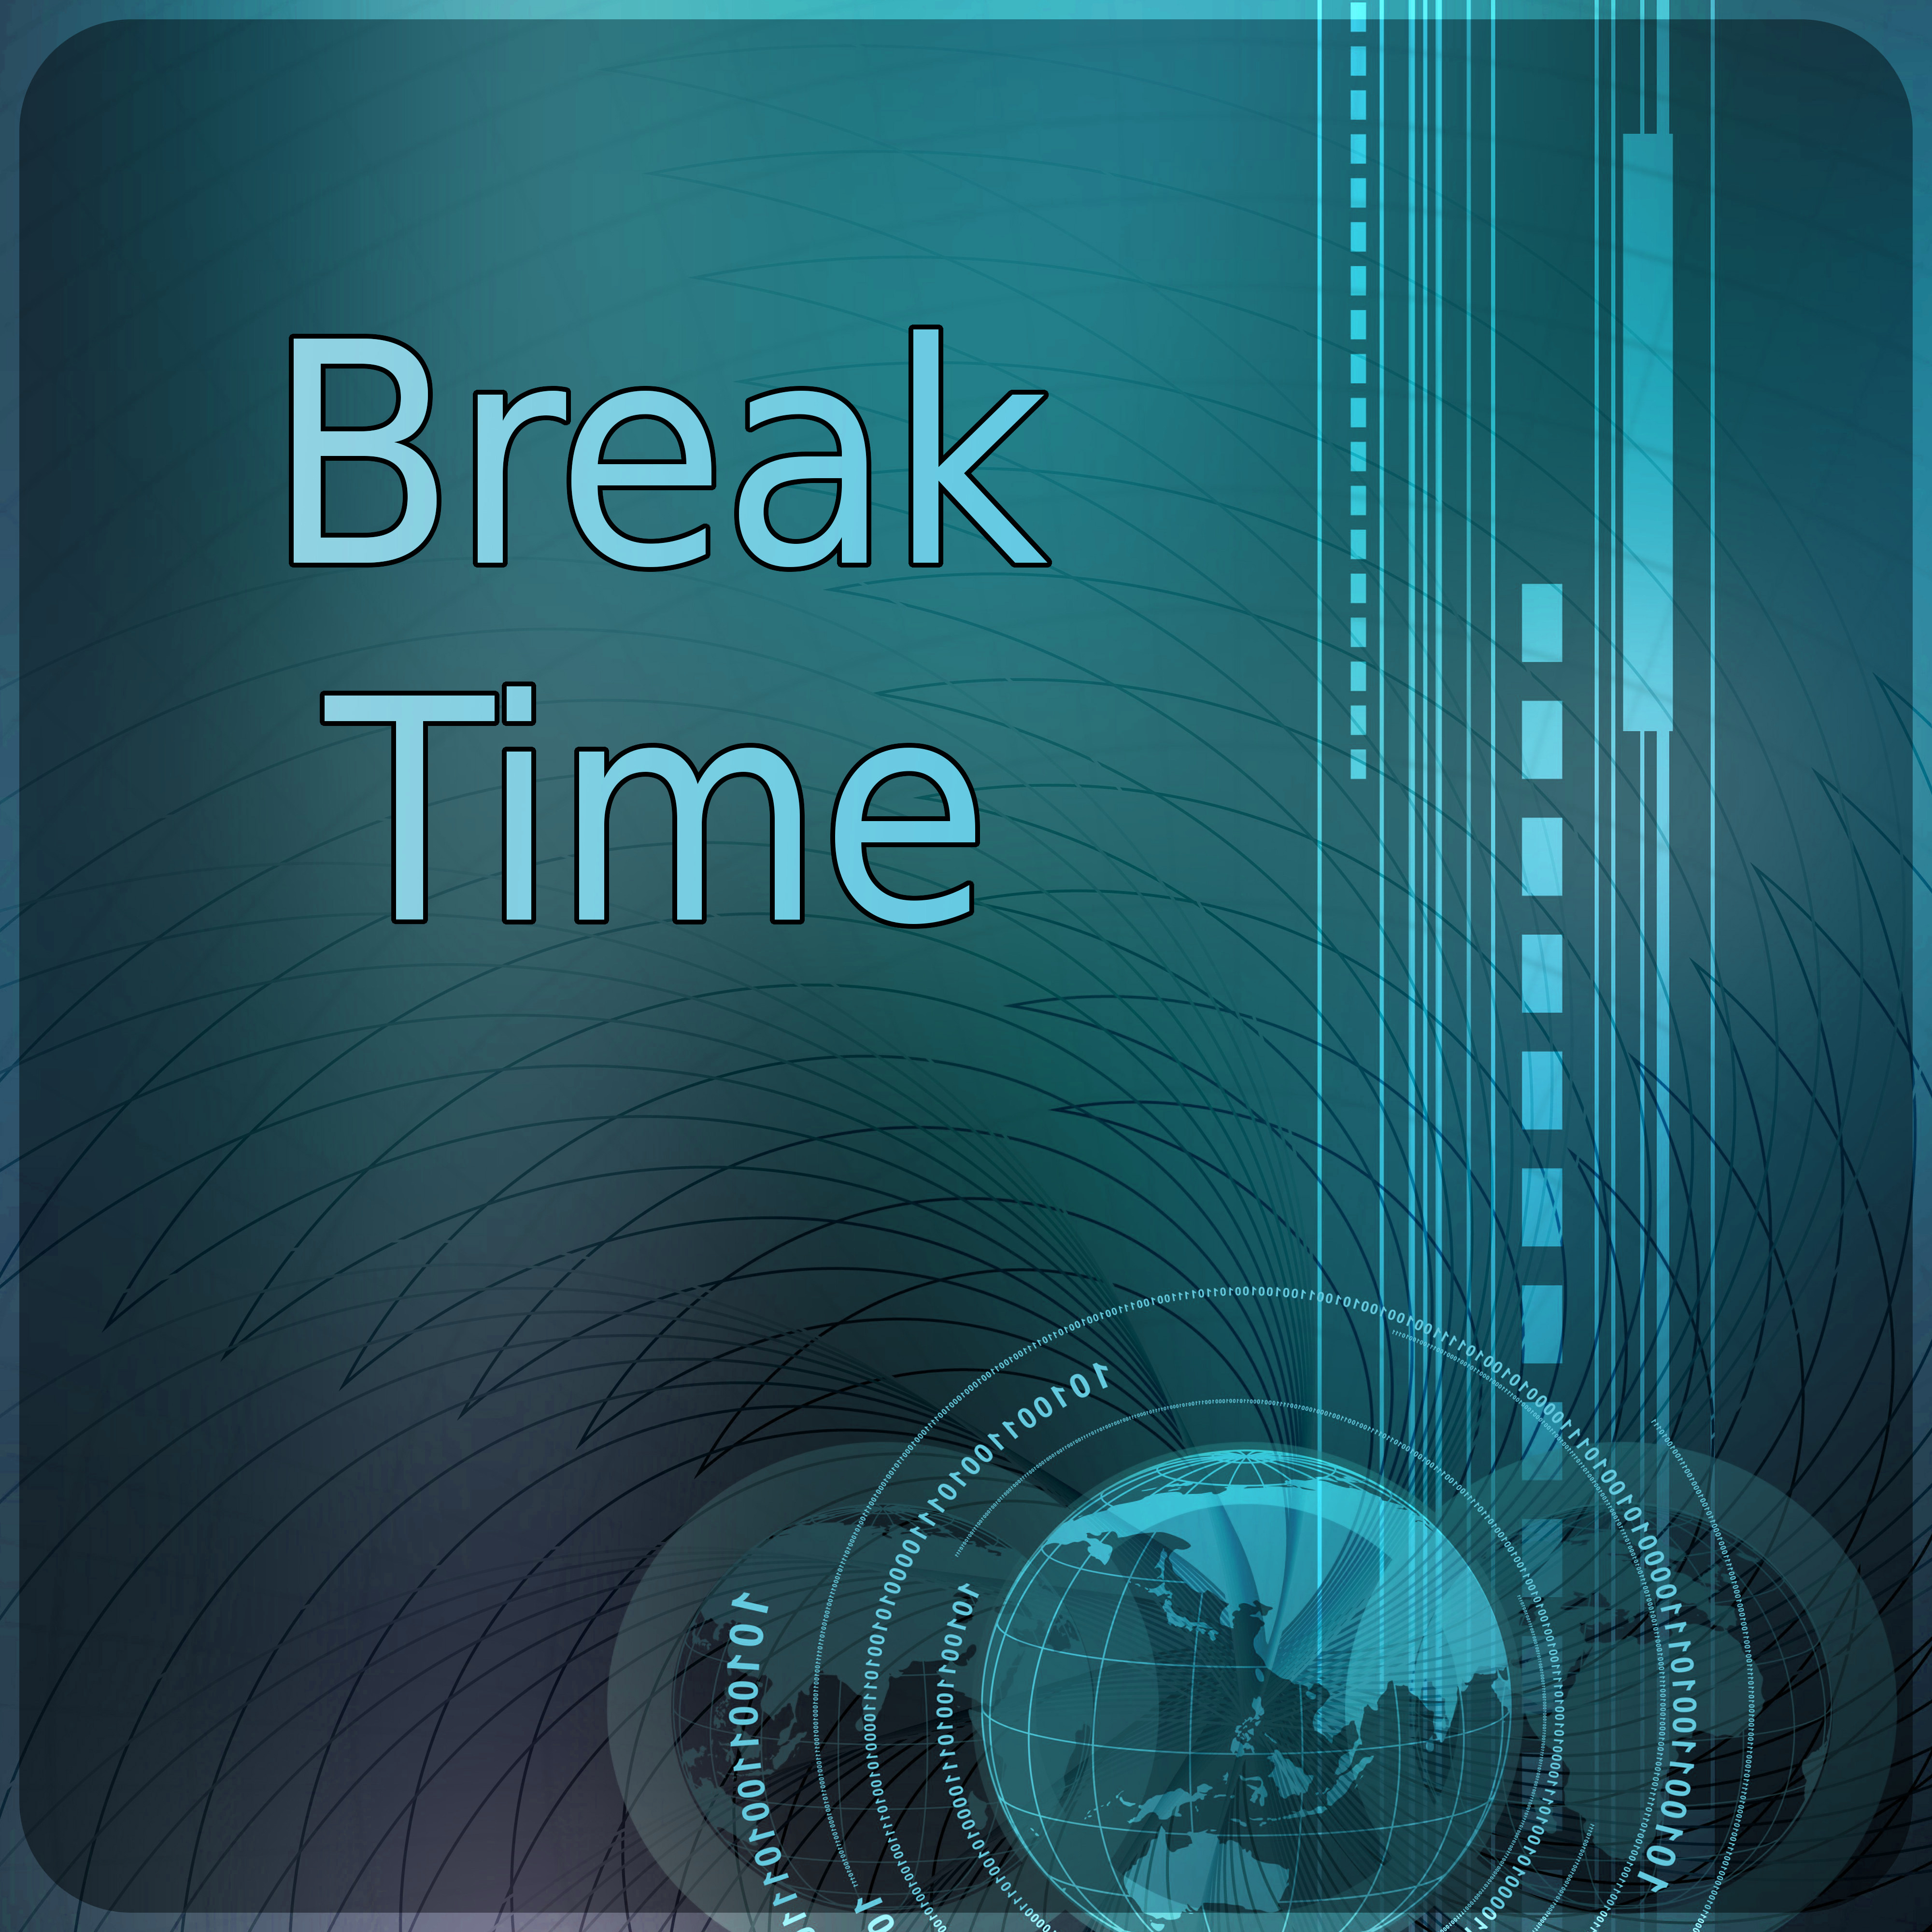 Break Time  Concentration Sounds, New Age Relaxing Music for the Office, Anteroom, Lobby  Waiting Room, Soothing Sounds